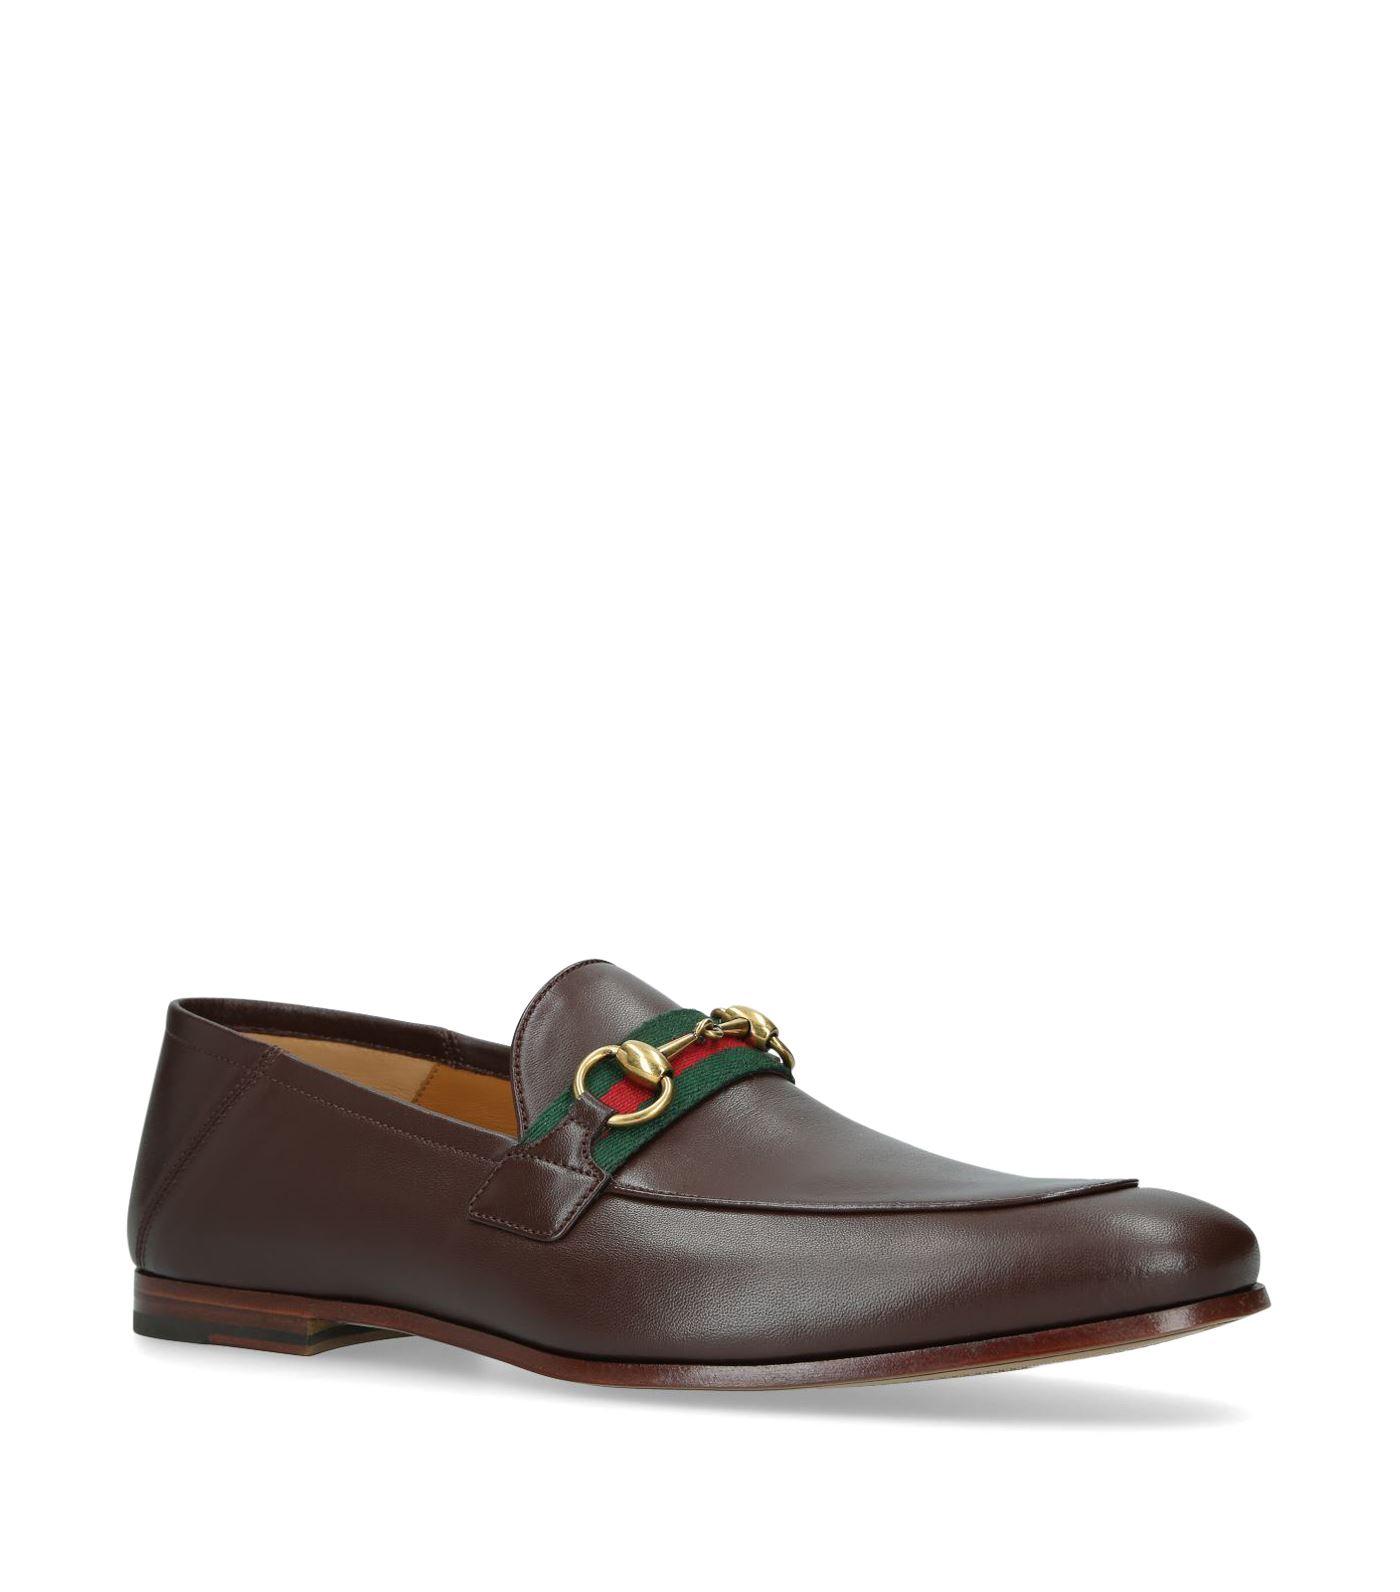 Gucci Leather Brixton Web Loafers in Brown for Men - Save 6% - Lyst